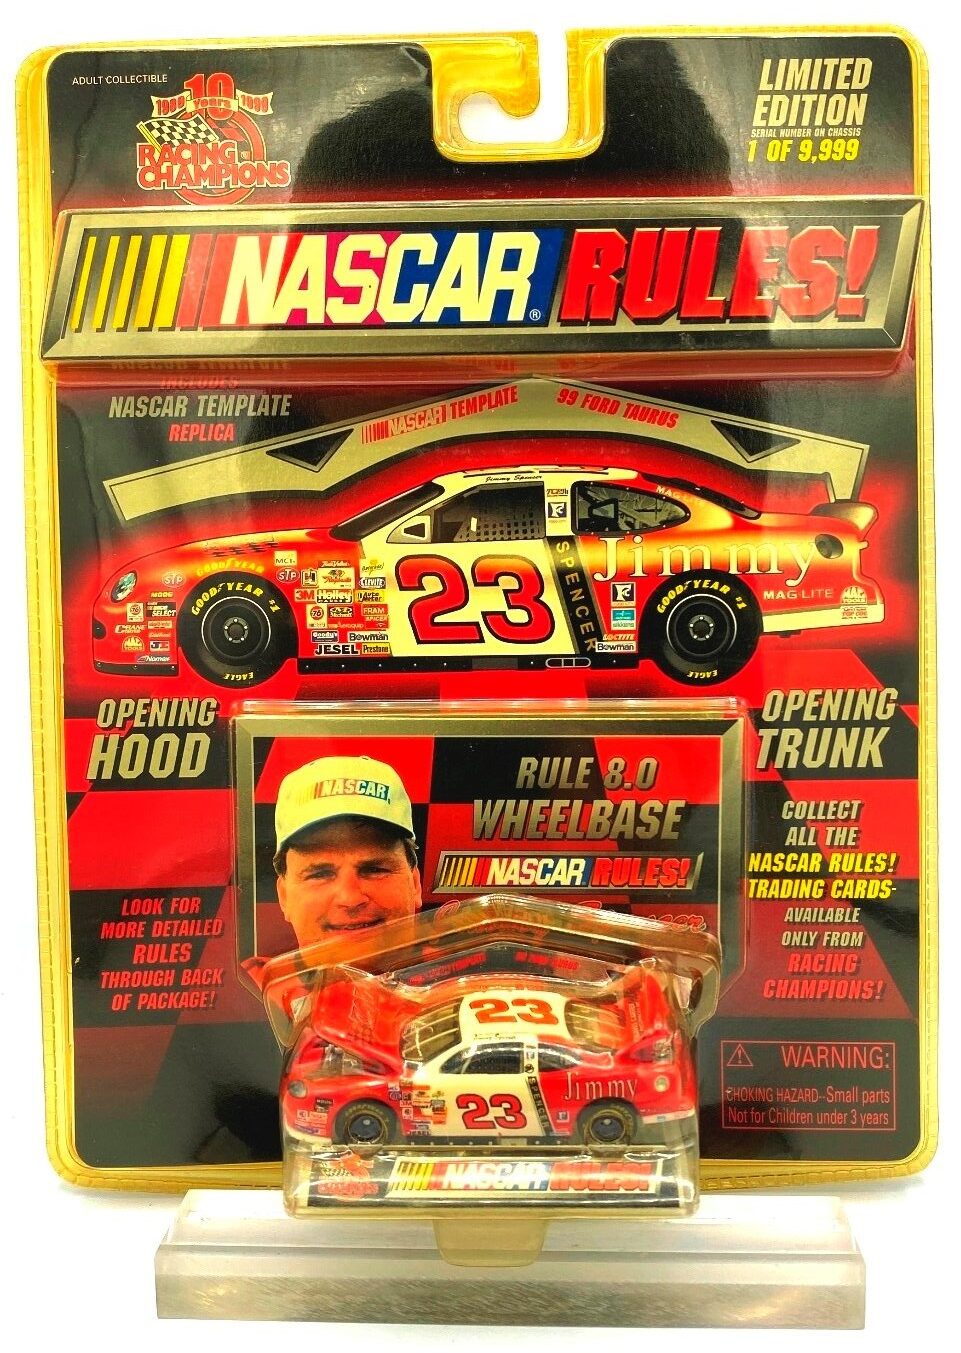 Nascar Rules! Jimmy Spencer '99 Ford Taurus 23 TCE (Limited Edition 1